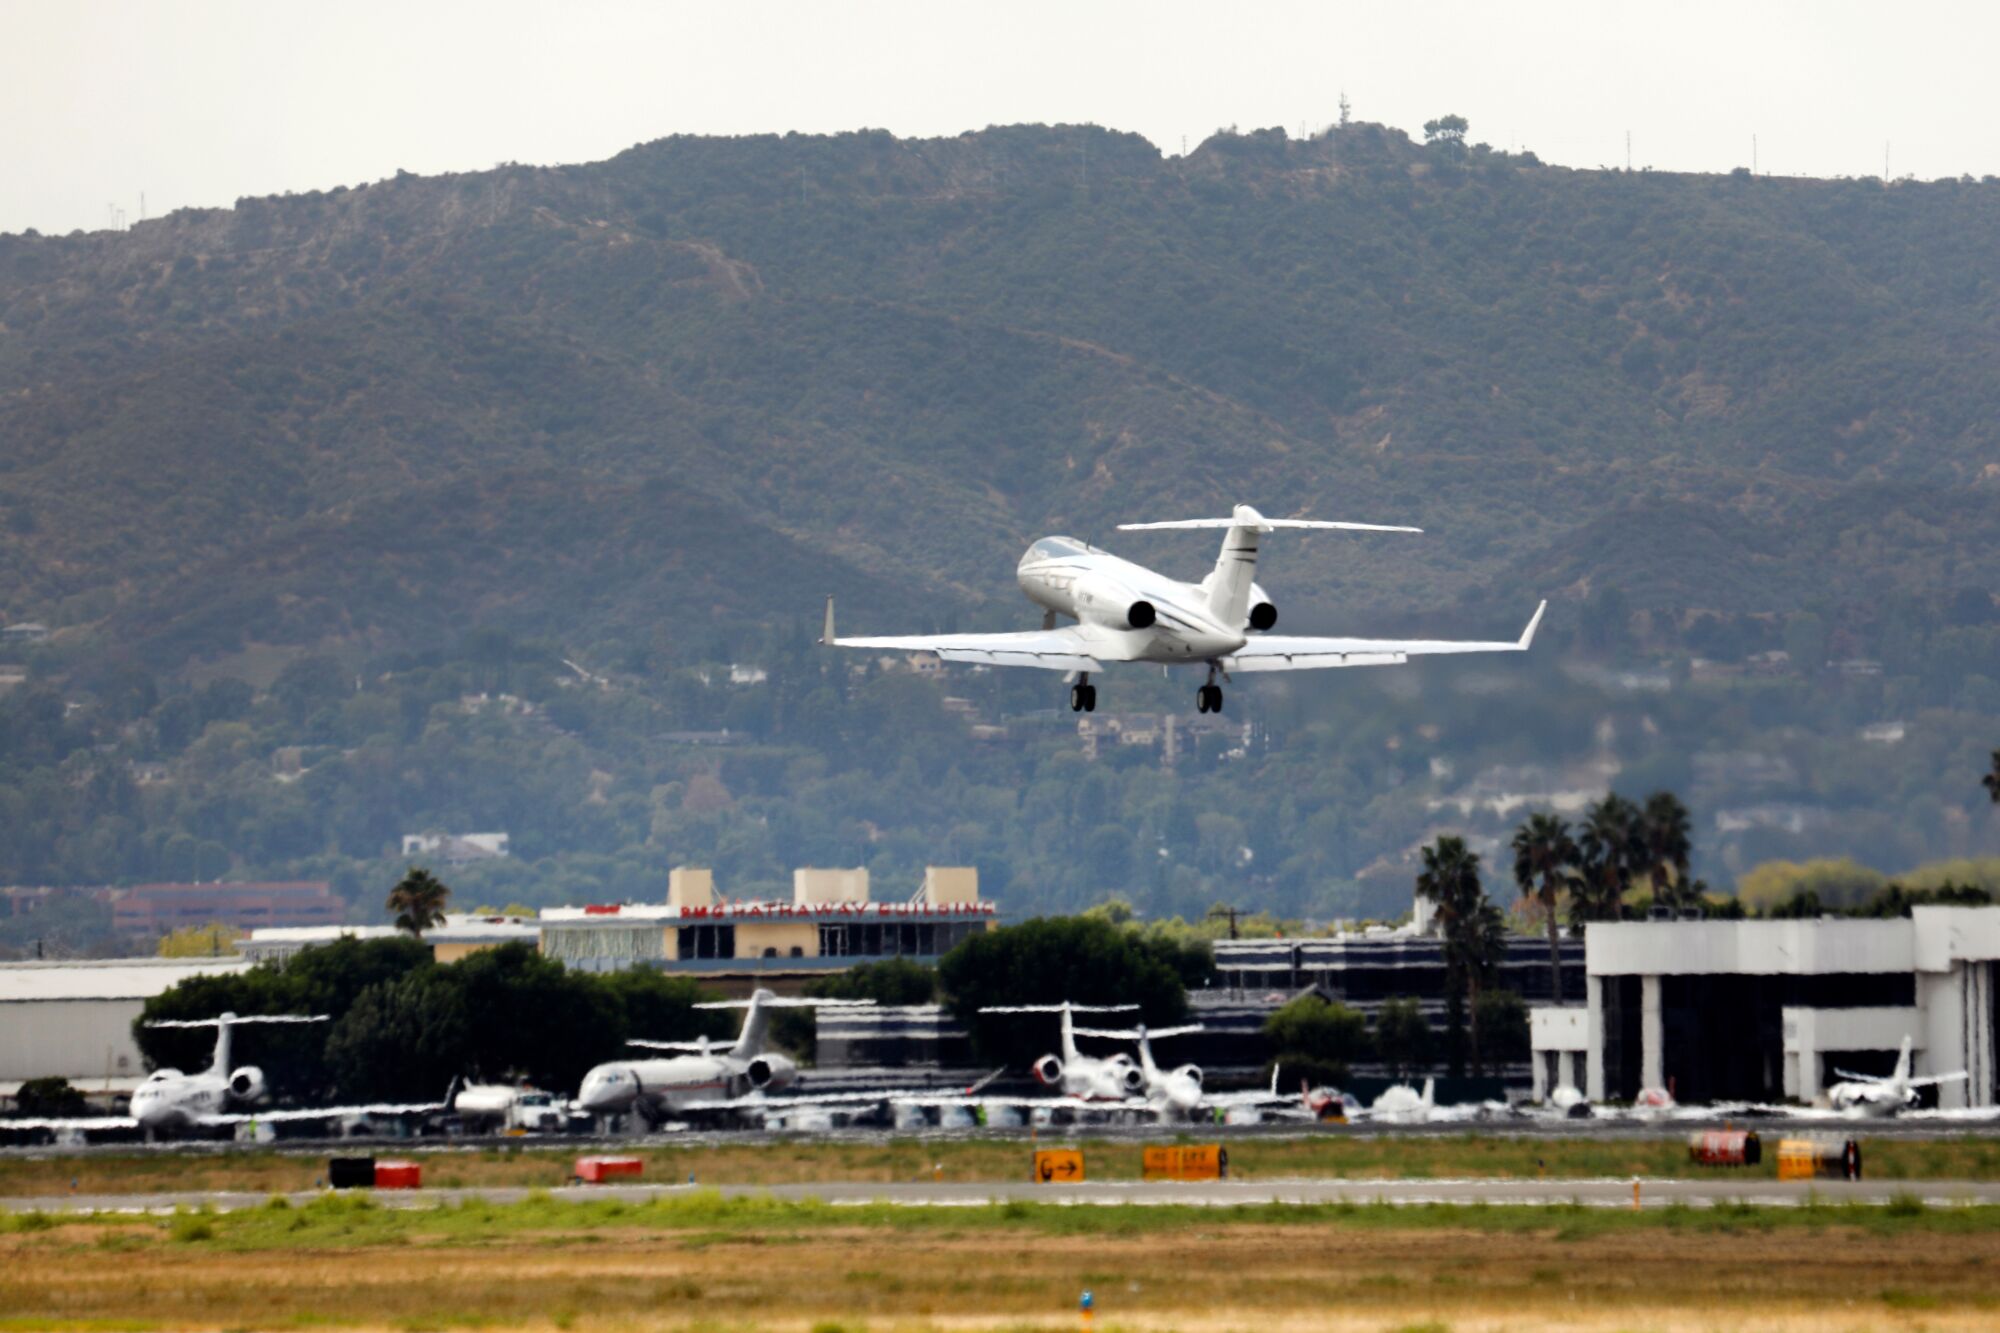 A private jet takes off from a runway at Van Nuys Airport, with the Hollywood Hills visible in the distance.